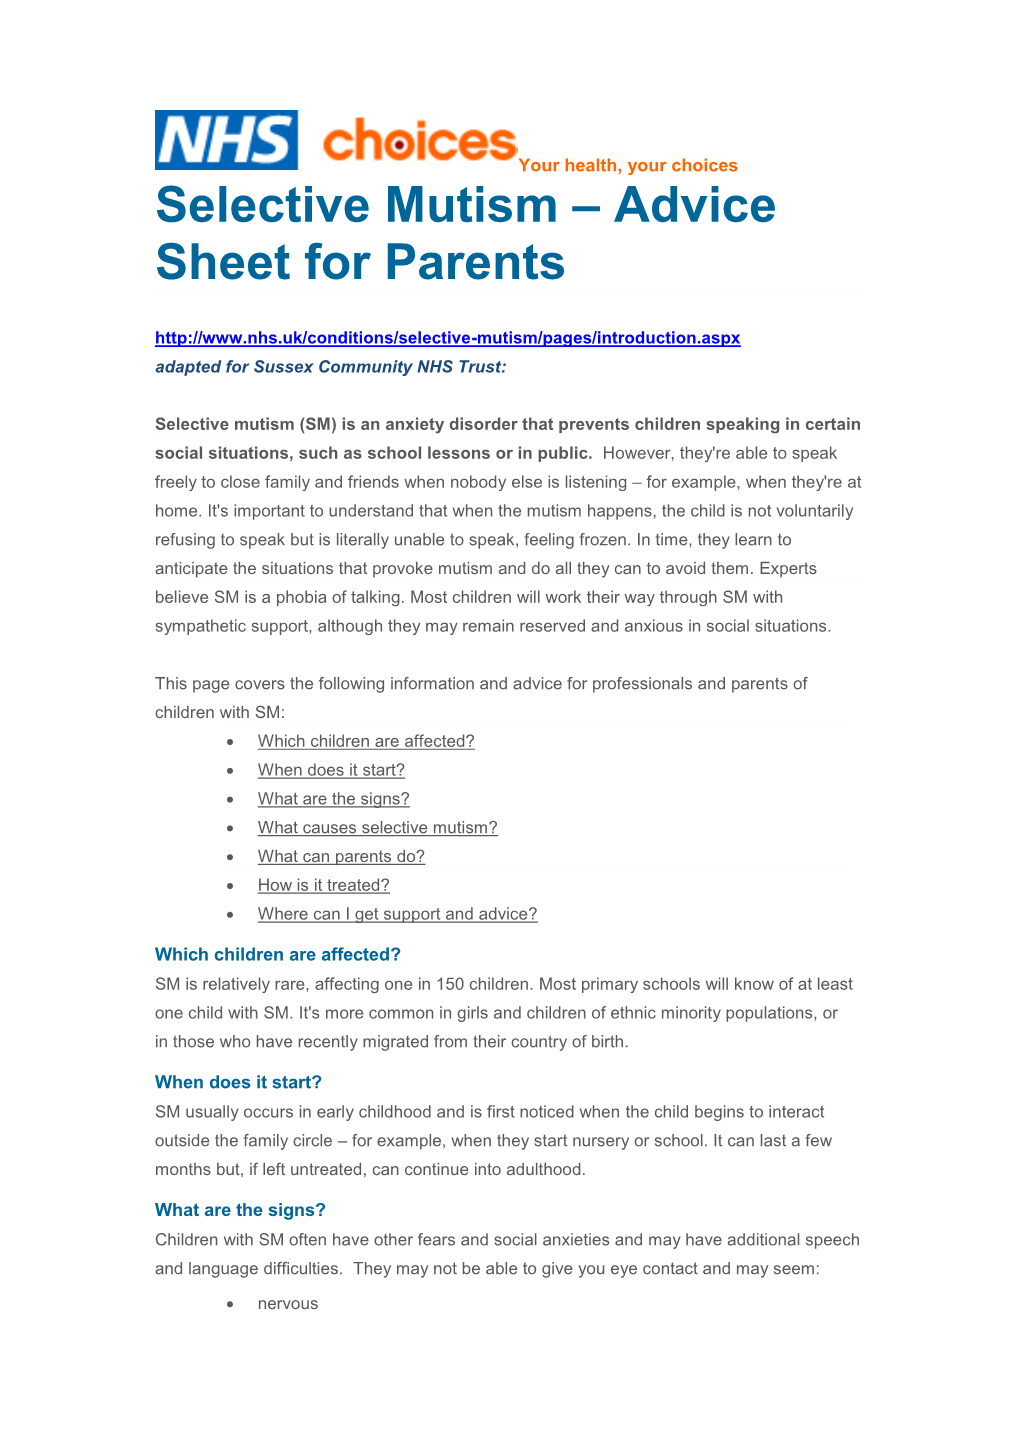 Selective Mutism – Advice Sheet for Parents Adapted for Sussex Community NHS Trust